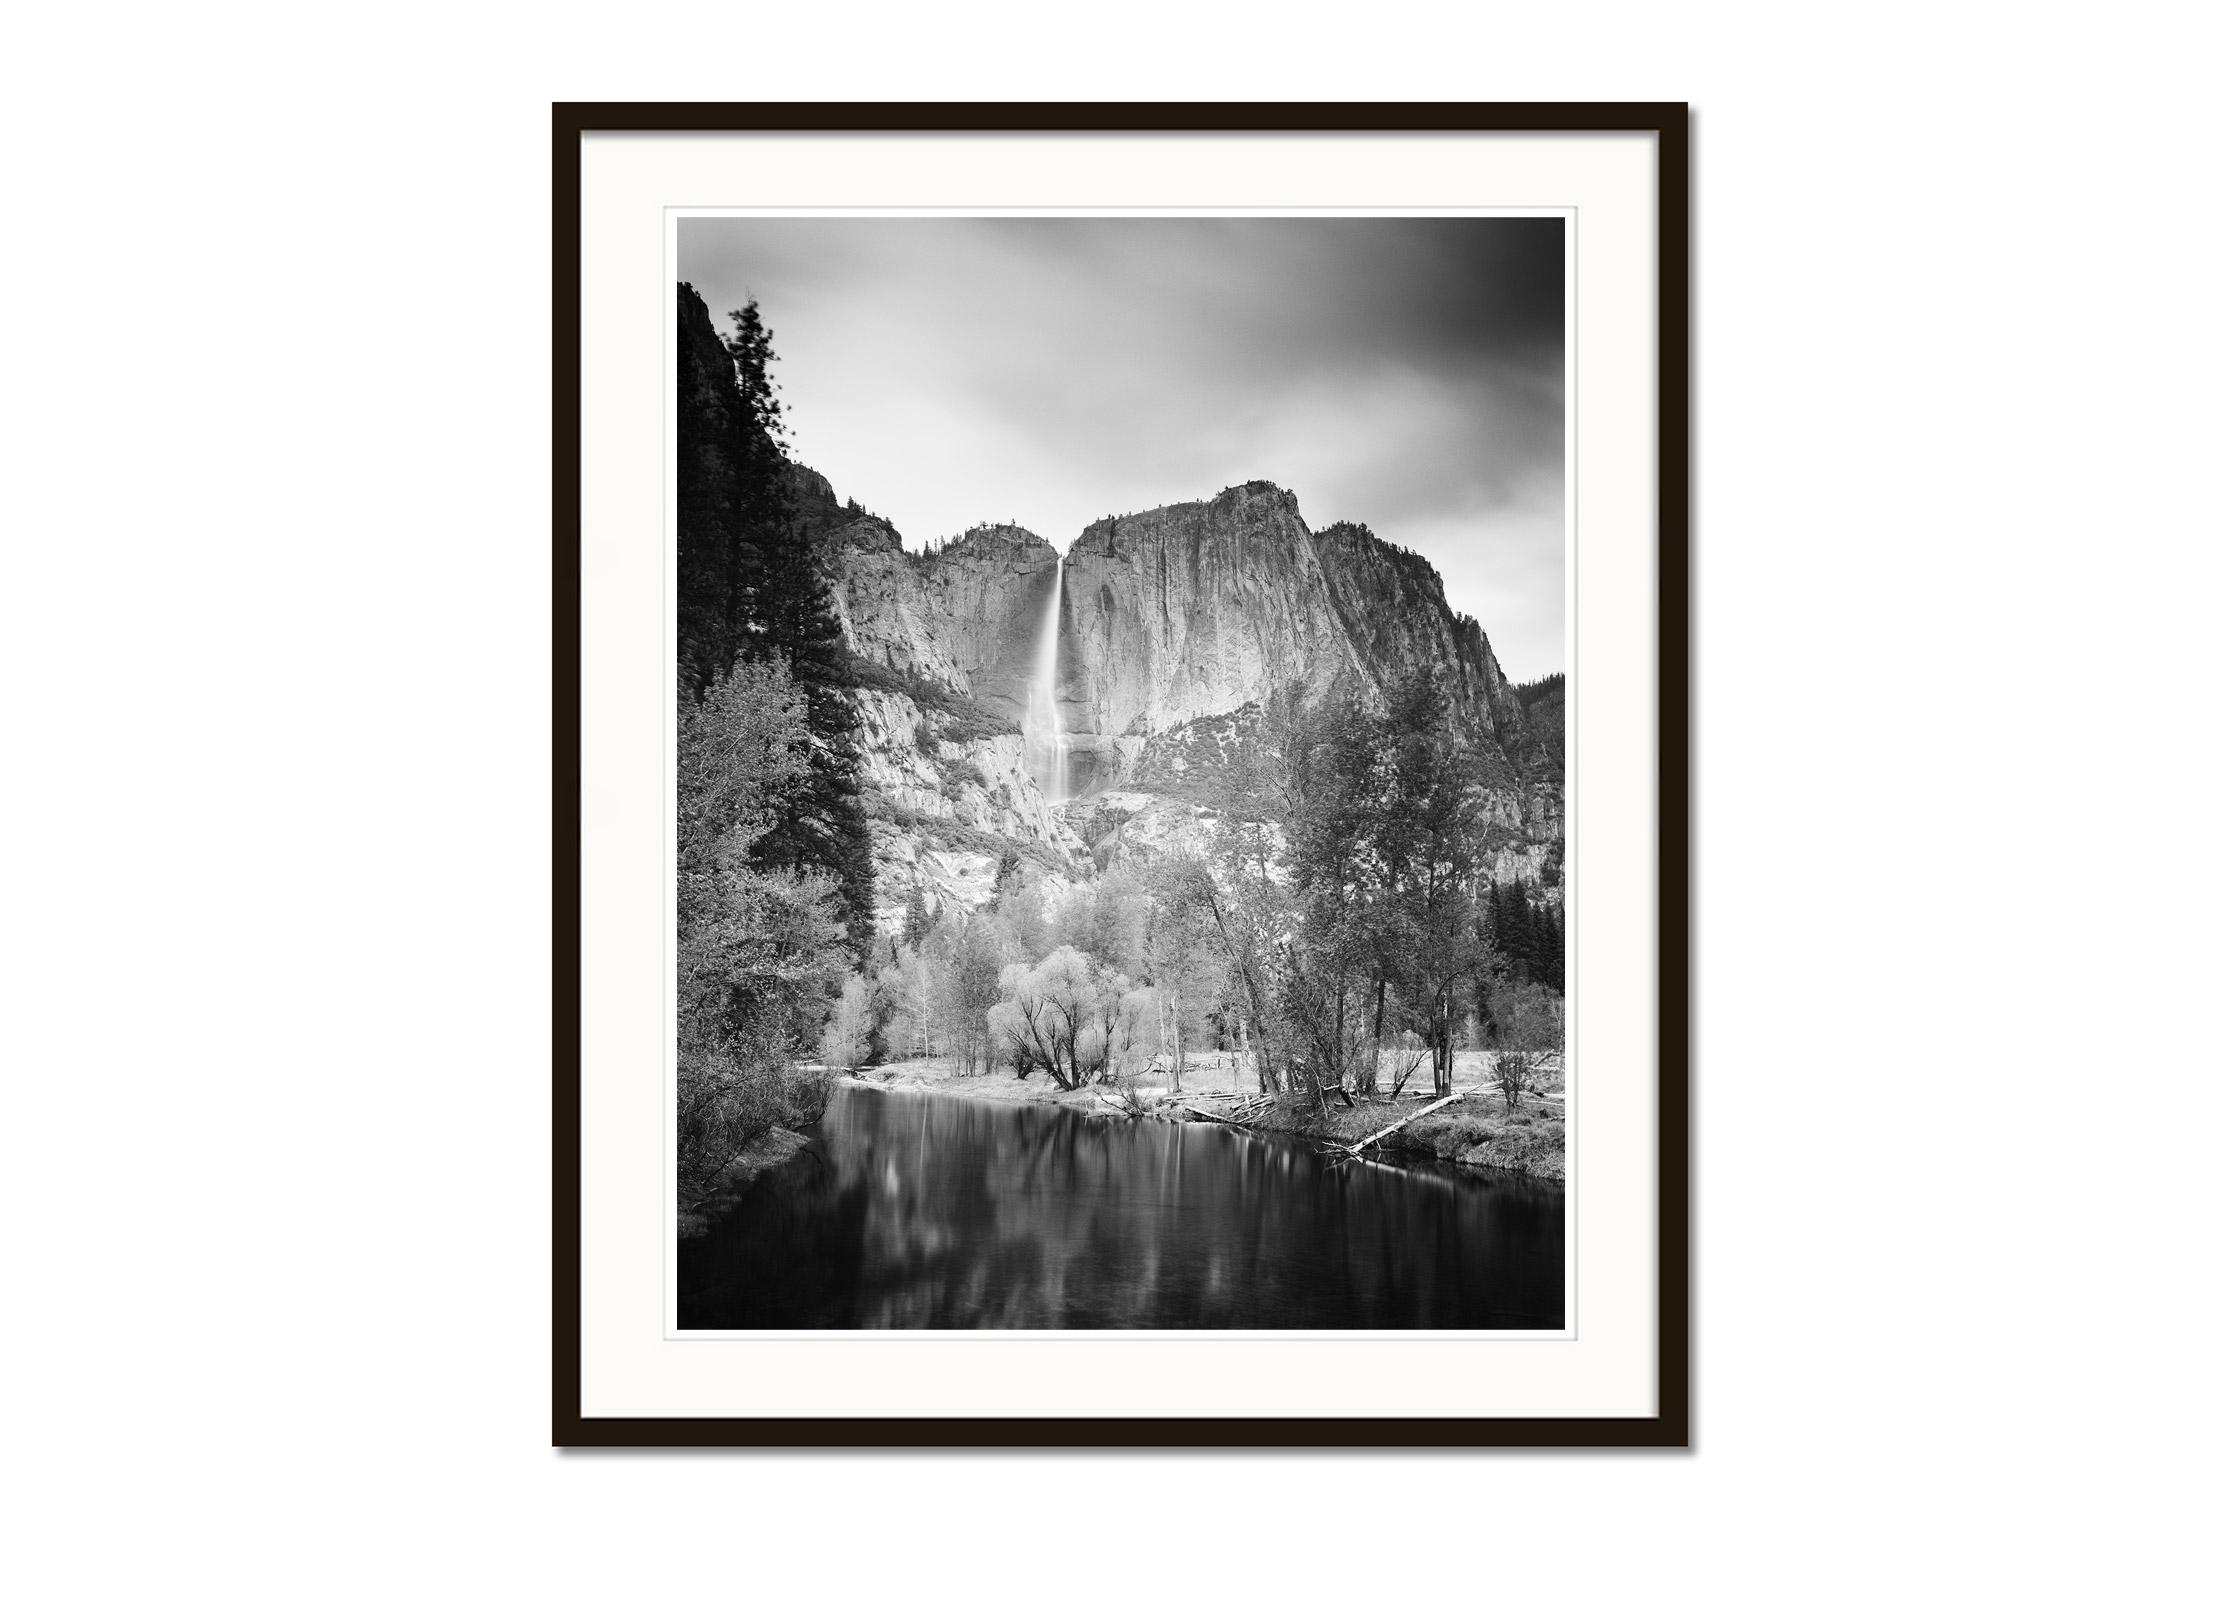 Upper Yosemite Falls, California, USA, black and white photography, landscape - Contemporary Photograph by Gerald Berghammer, Ina Forstinger